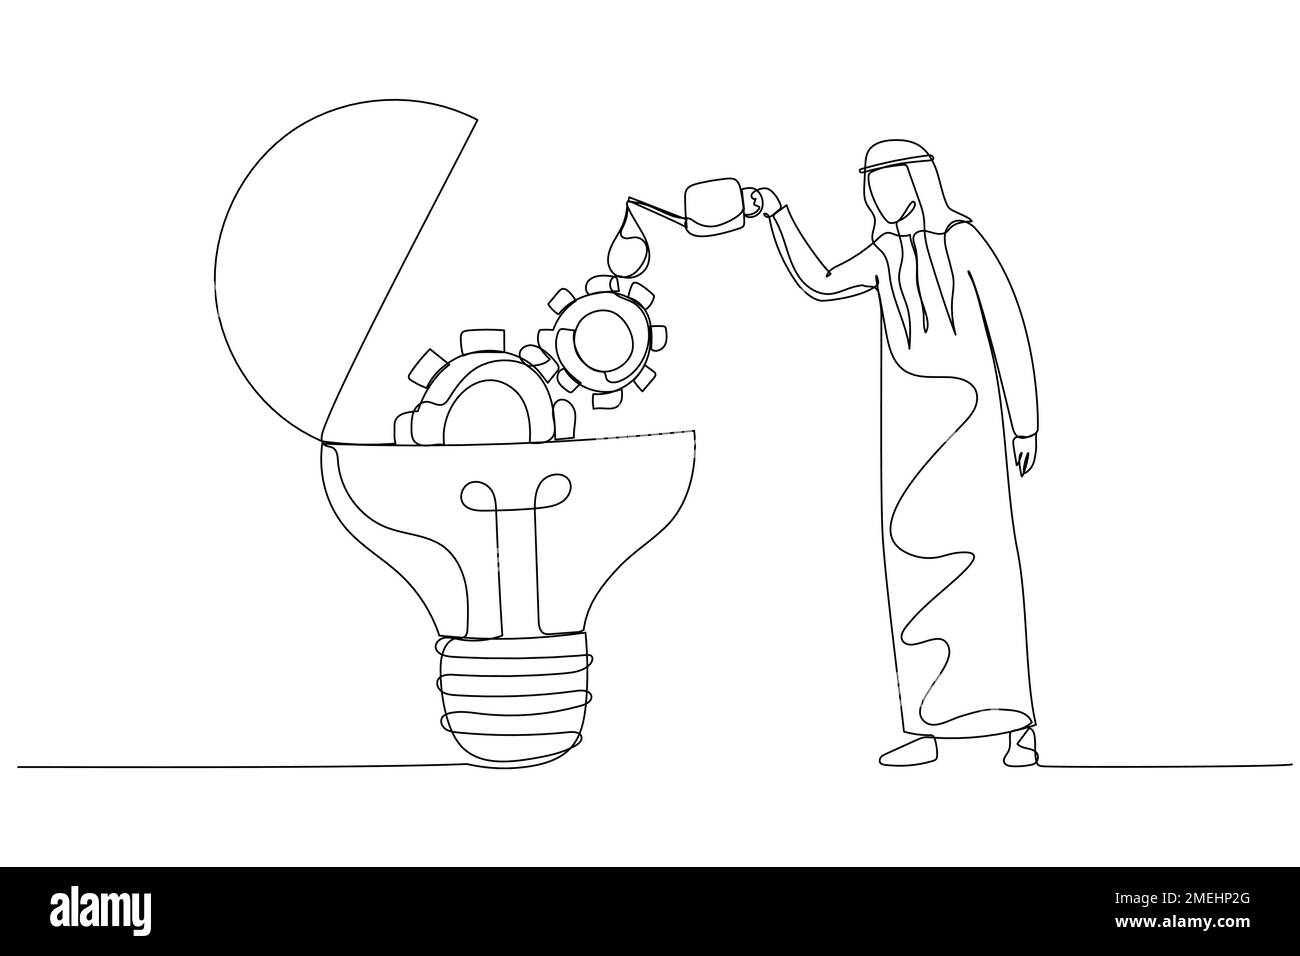 arab man drop oil lubricant into idea lightbulb lamp with mechanical gears. One line art style Stock Vector